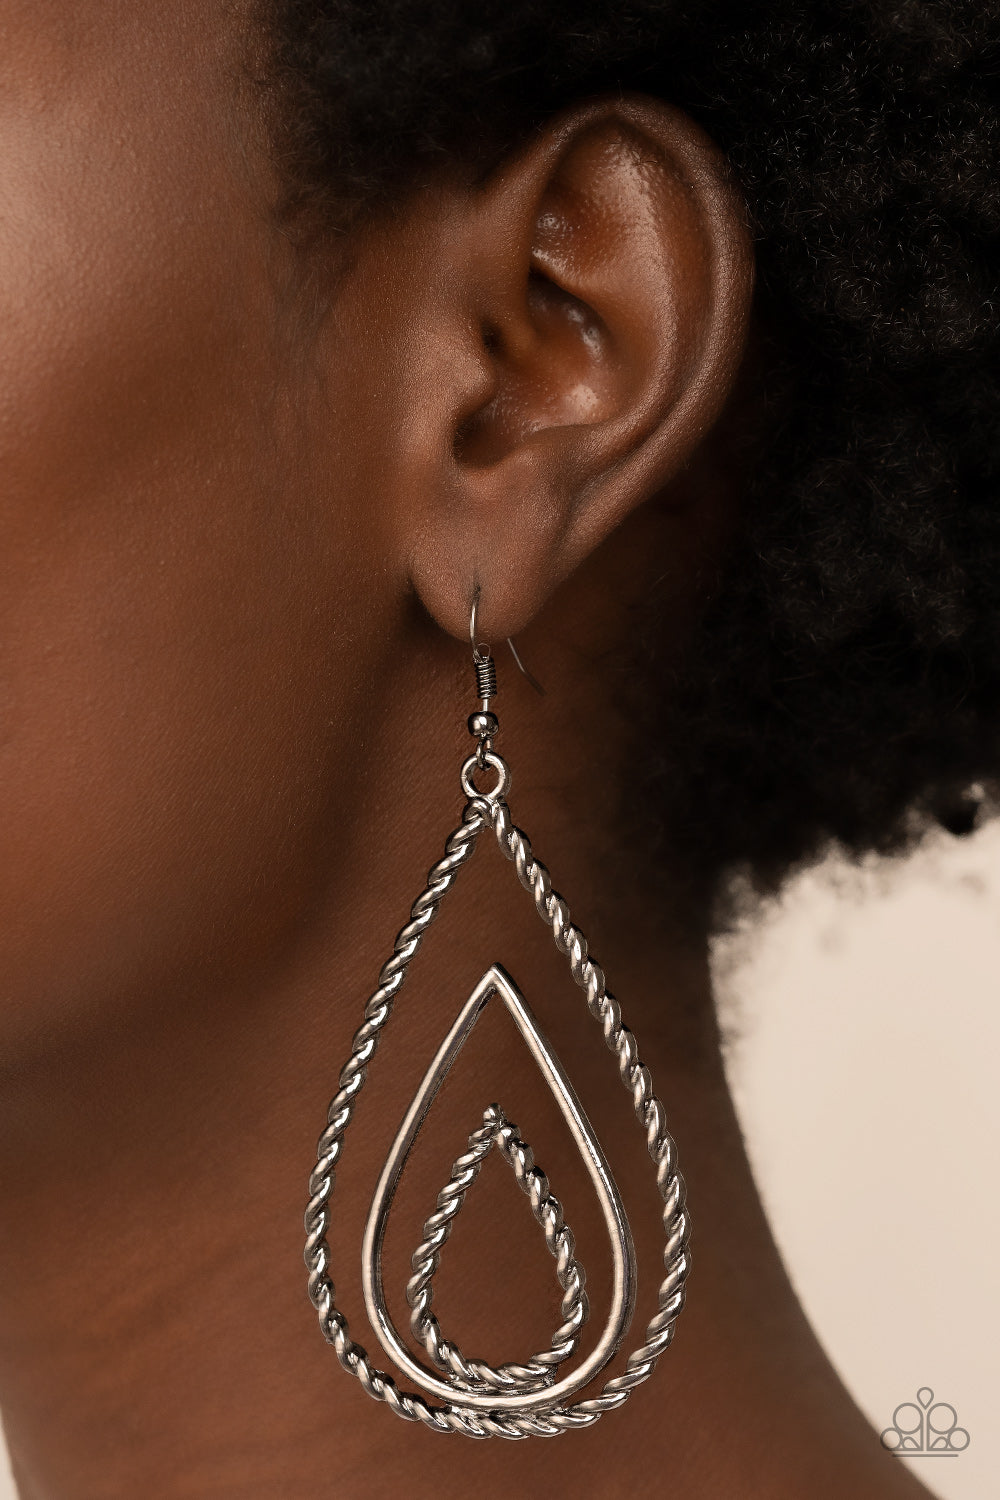 Tastefully Twisty Black Earring - Paparazzi Accessories   Smooth and twisted gunmetal teardrops stack into a rippling lure for an edgy look. Earring attaches to a standard fishhook fitting.  Sold as one pair of earrings.